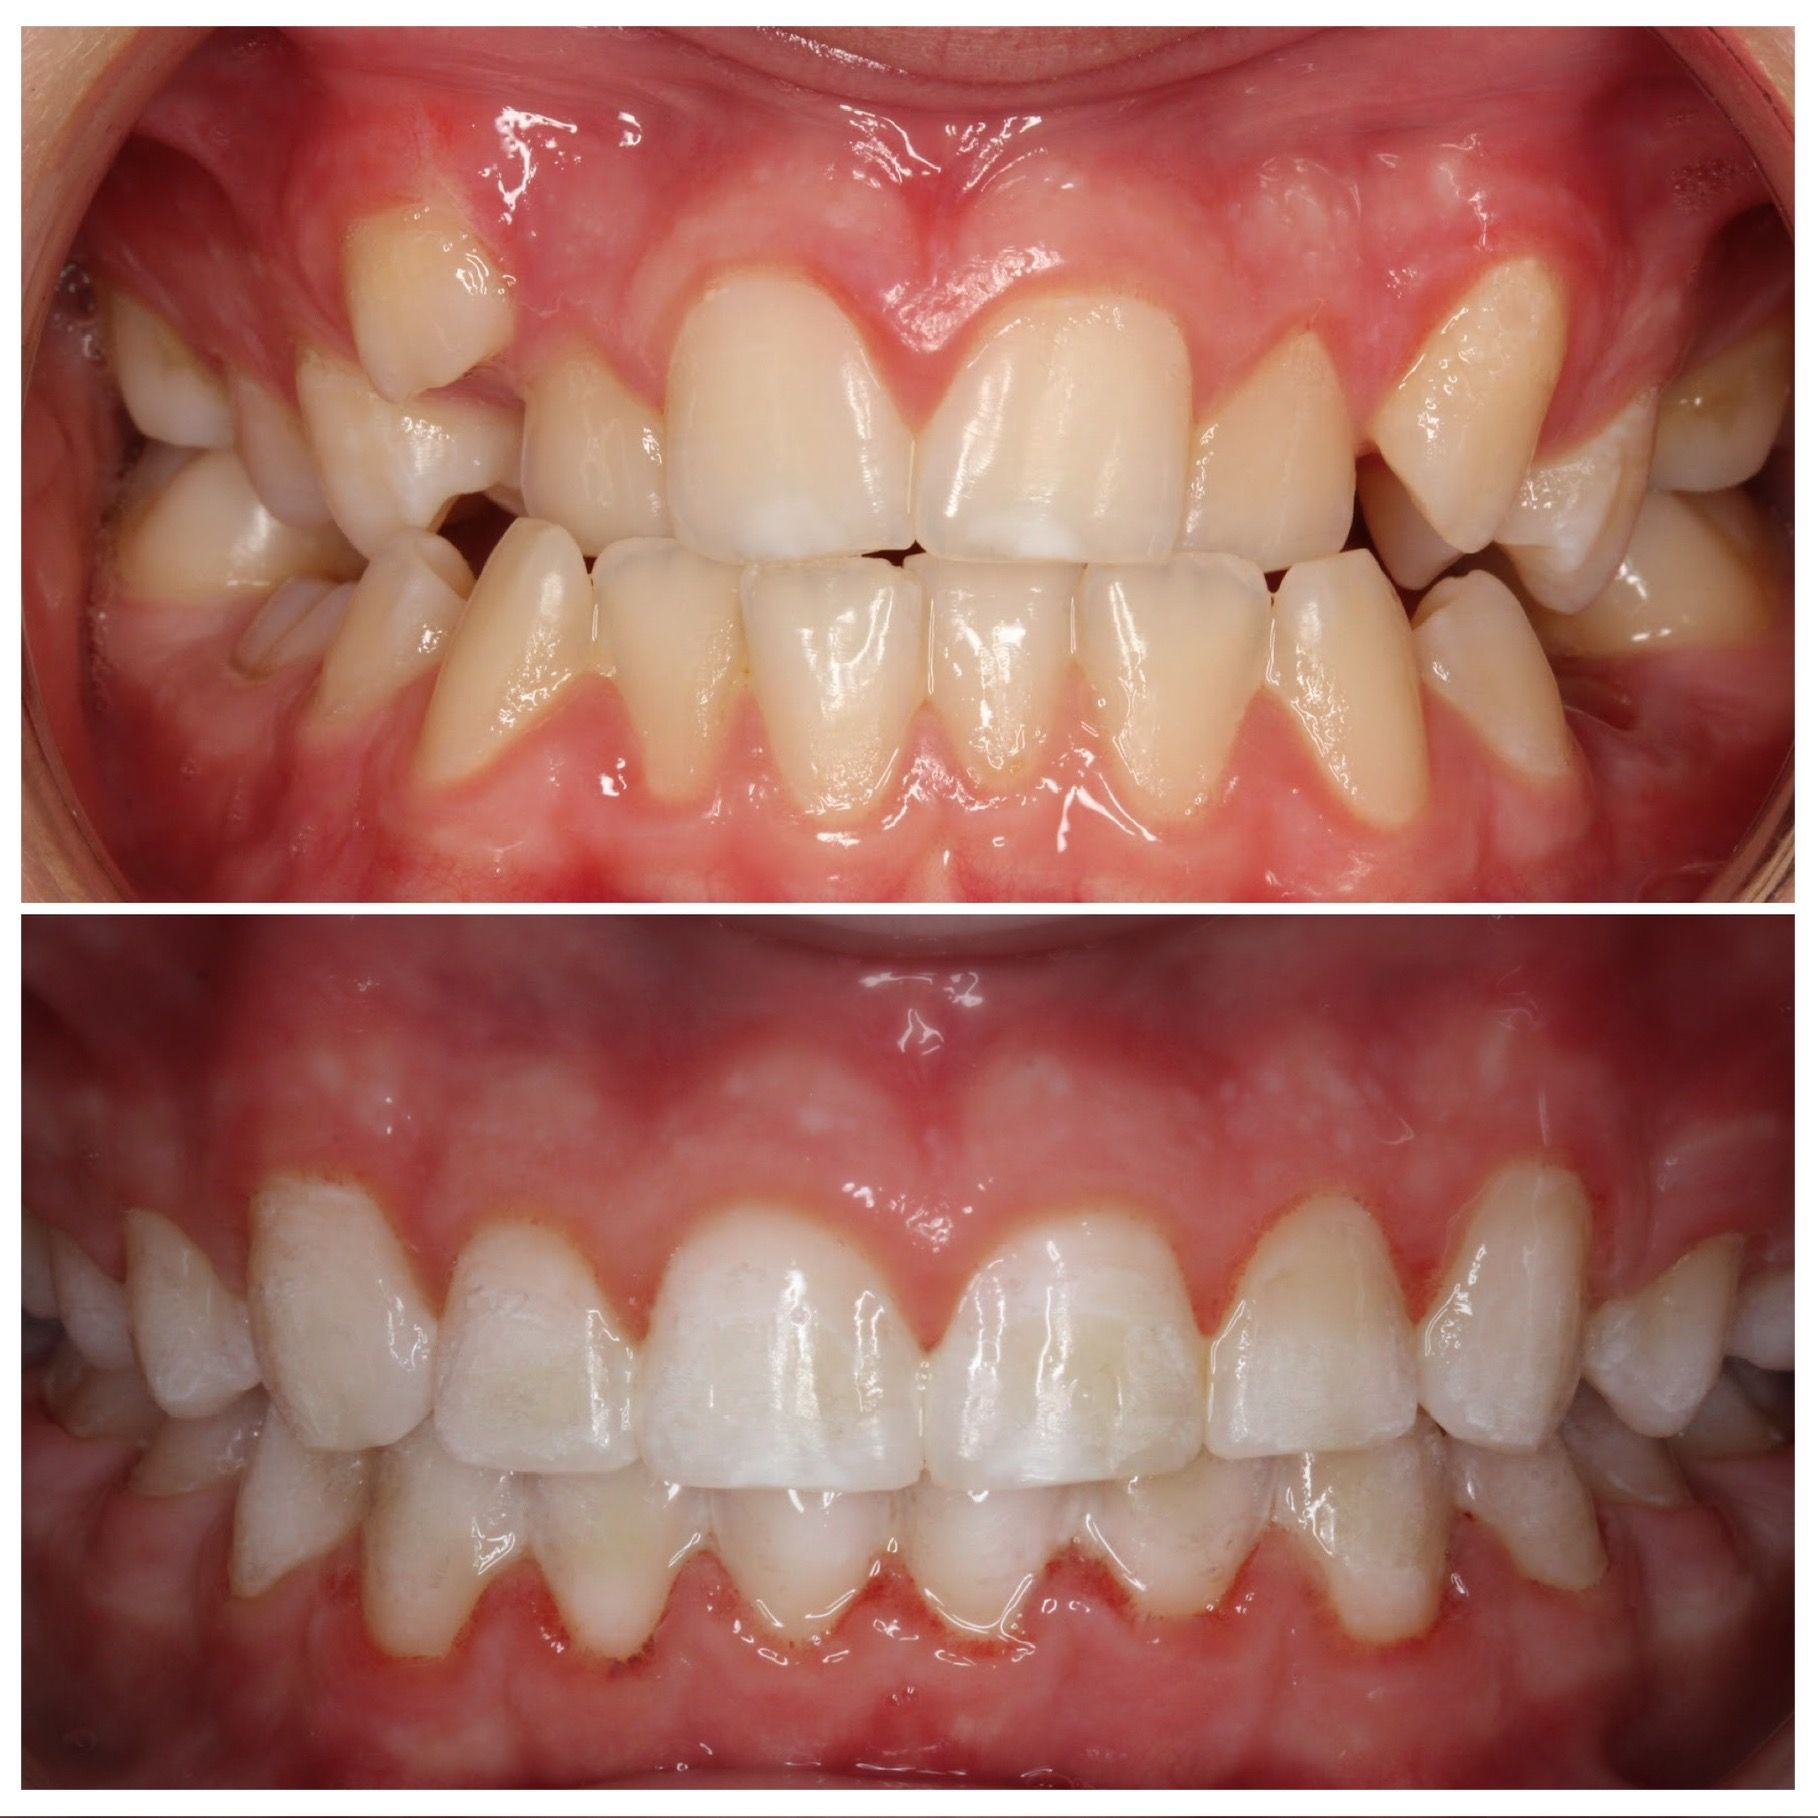 A before and after picture of a person 's teeth